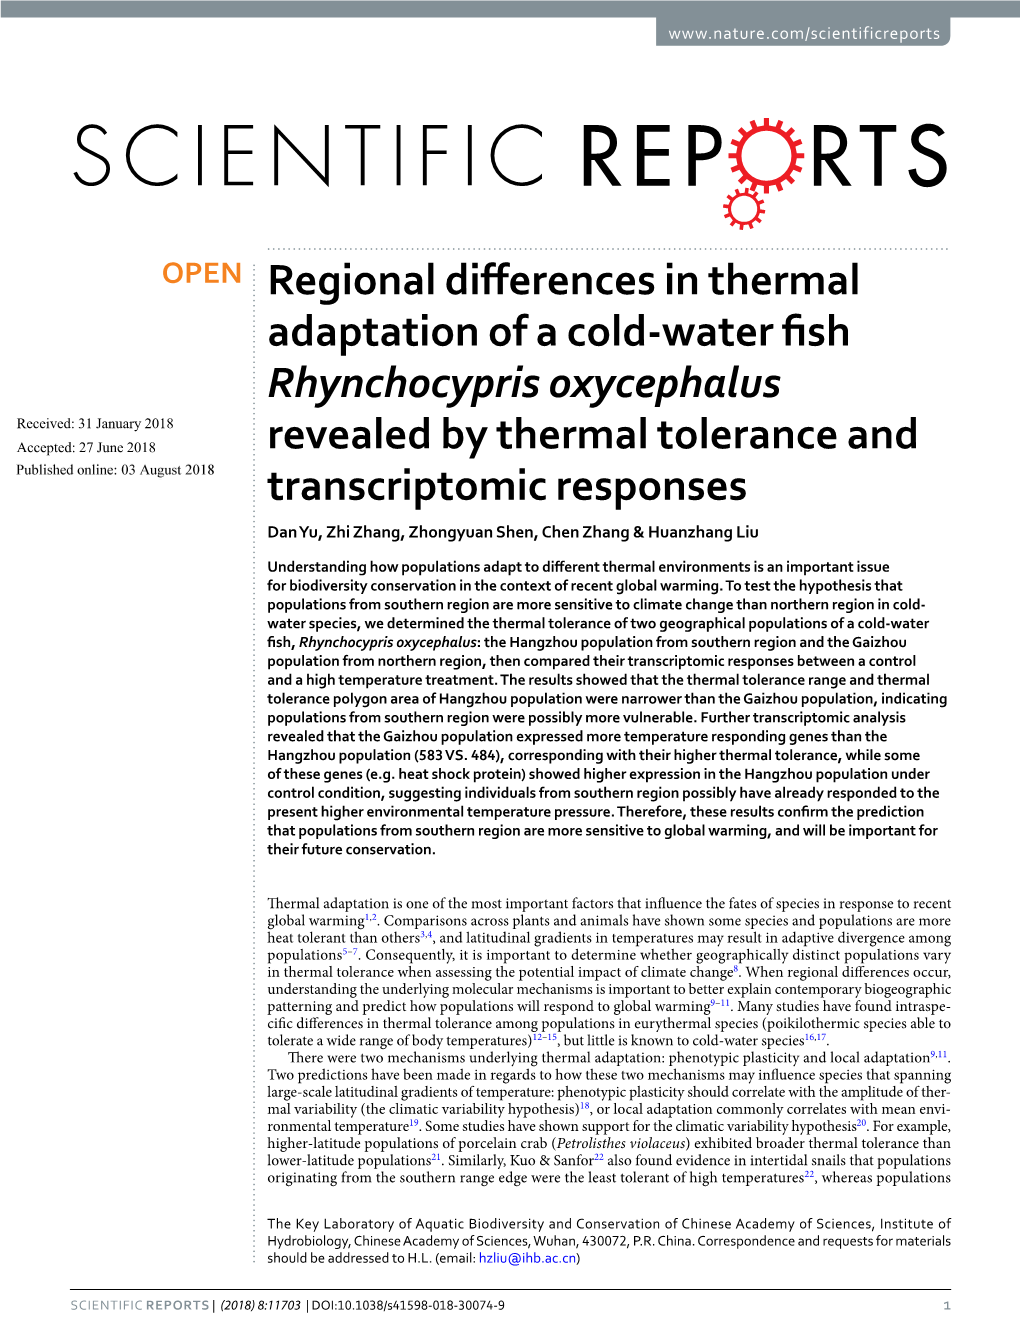 Regional Differences in Thermal Adaptation of a Cold-Water Fish Rhynchocypris Oxycephalus Revealed by Thermal Tolerance and Tran